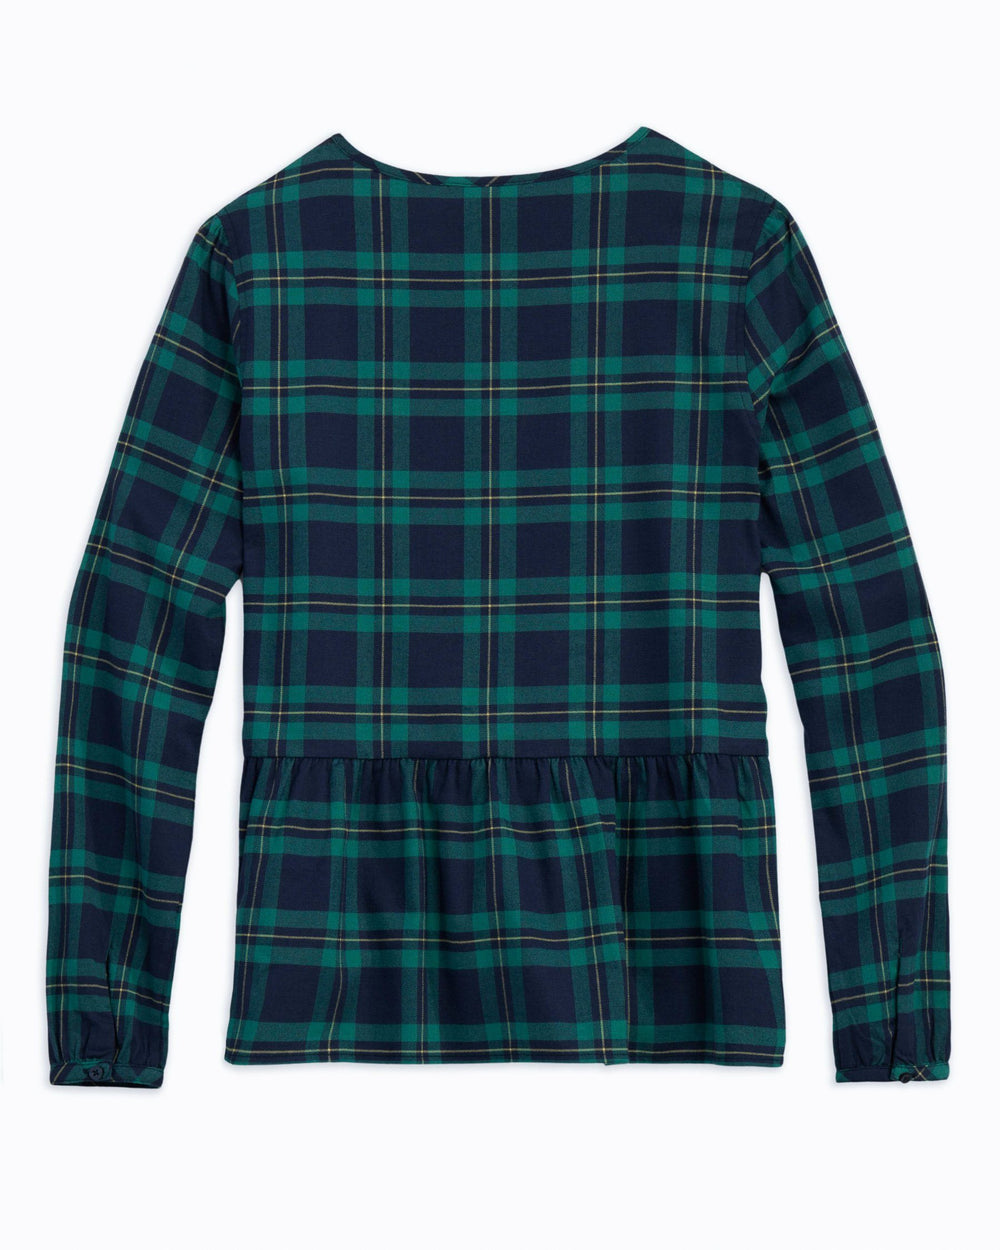 The flat back of the Women's Preston Flannel Intercoastal Top by Southern Tide - Evening Emerald